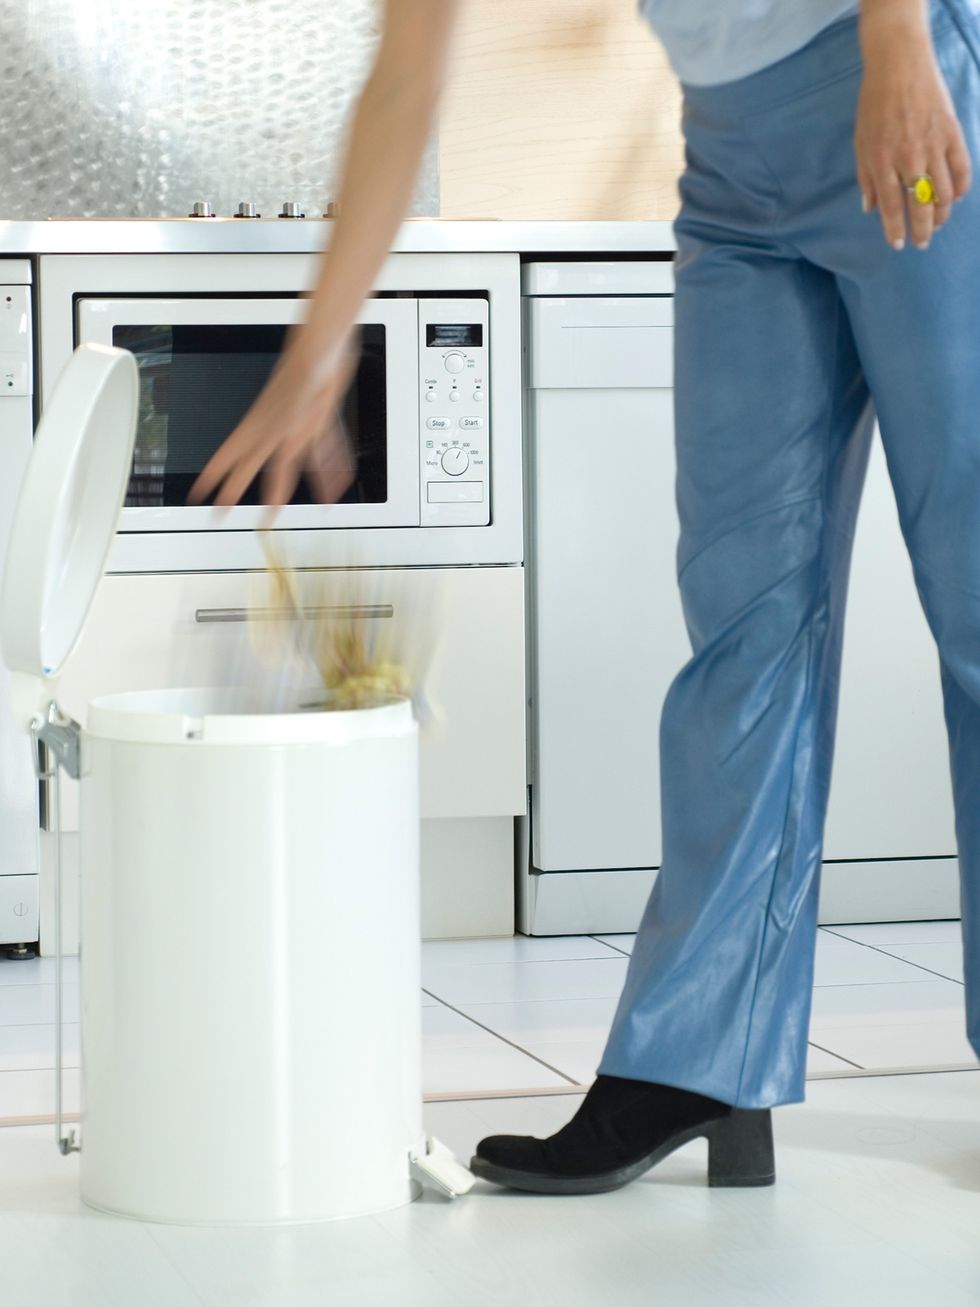 Major appliance, Standing, Leg, Home appliance, Washing machine, Jeans, Clothes dryer, Laundry, Trousers, Floor, 